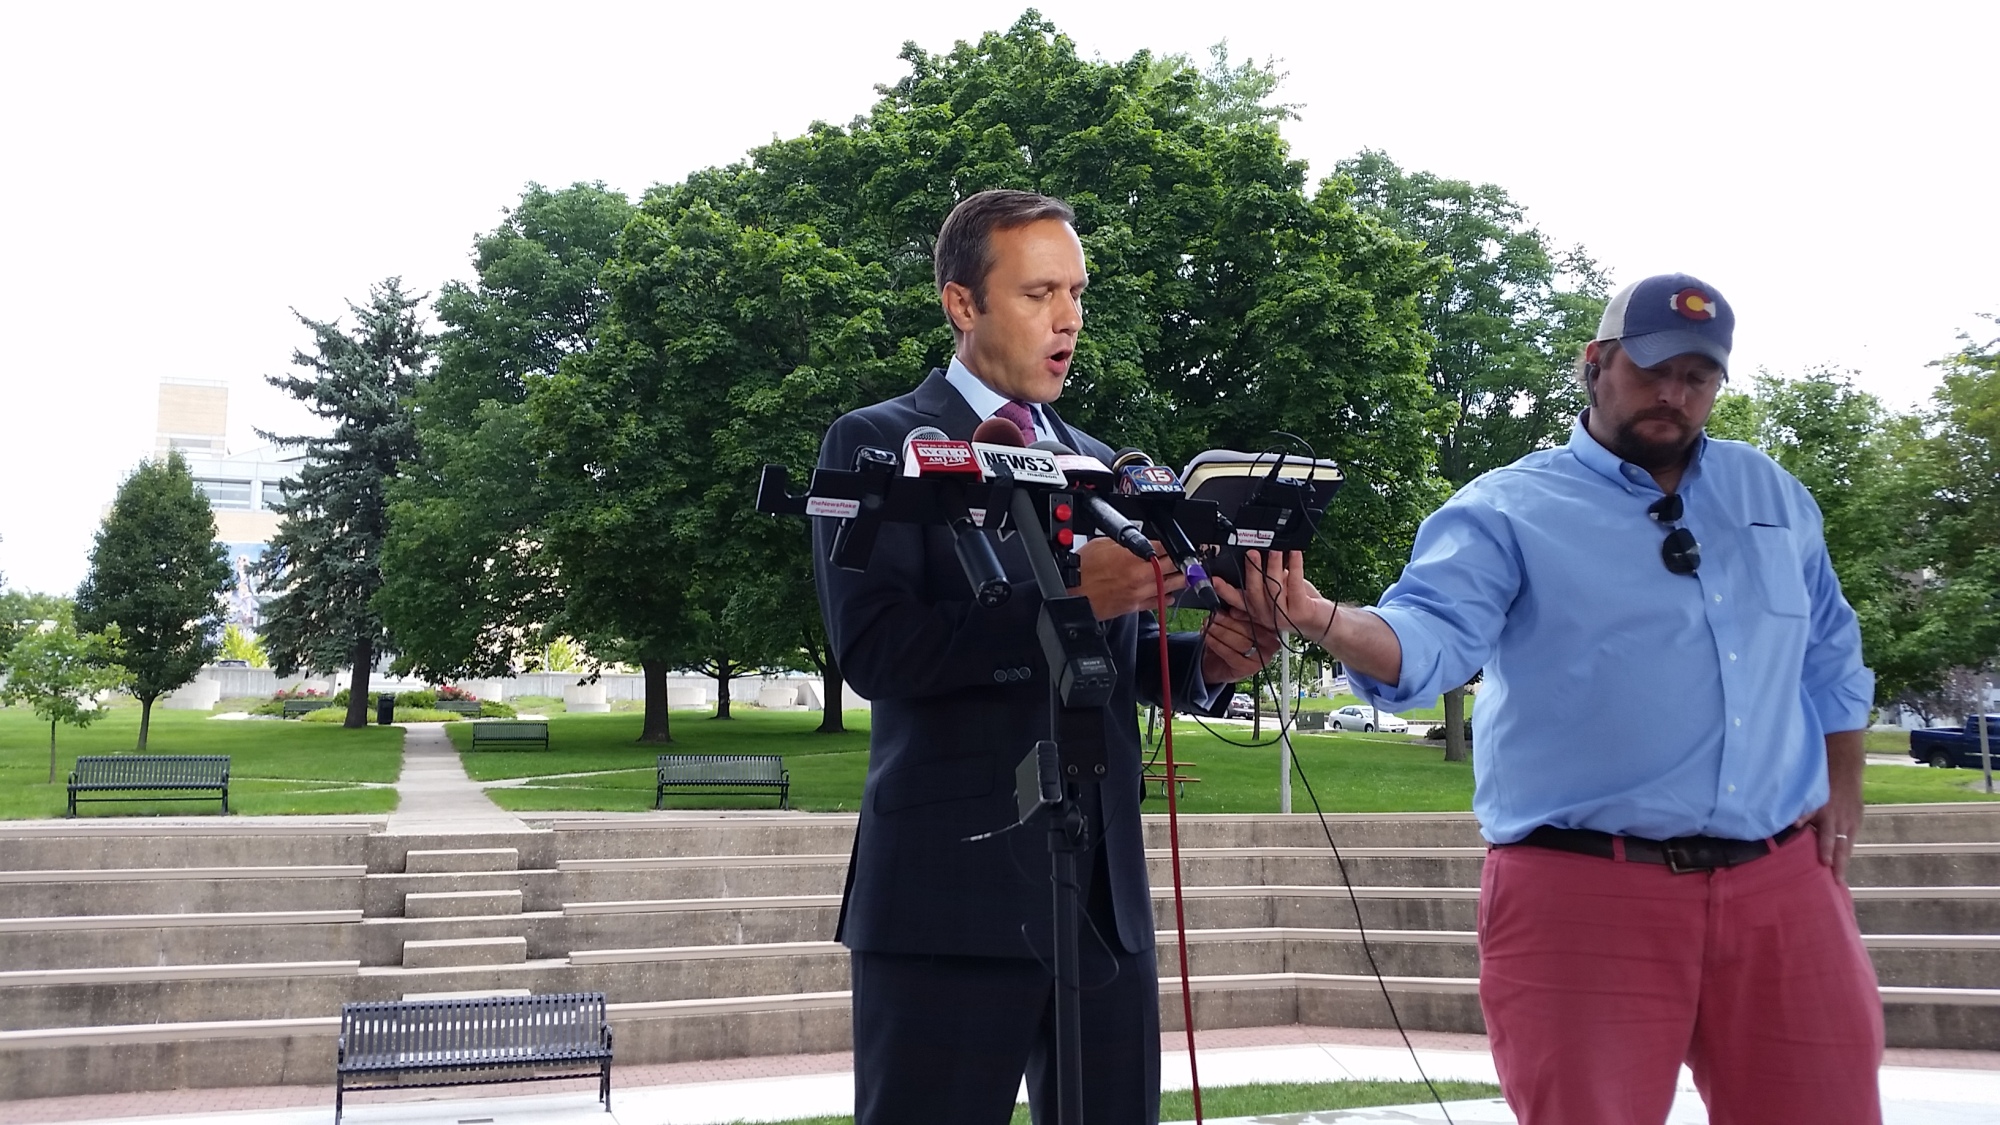 Paul Ryan’s Republican primary rival, Paul Nehlen, reads a statement to the media on Aug. 3, 2016, with the assistance of aide Noel Fritsch, outside a courthouse in Janesville, Wisconsin.
